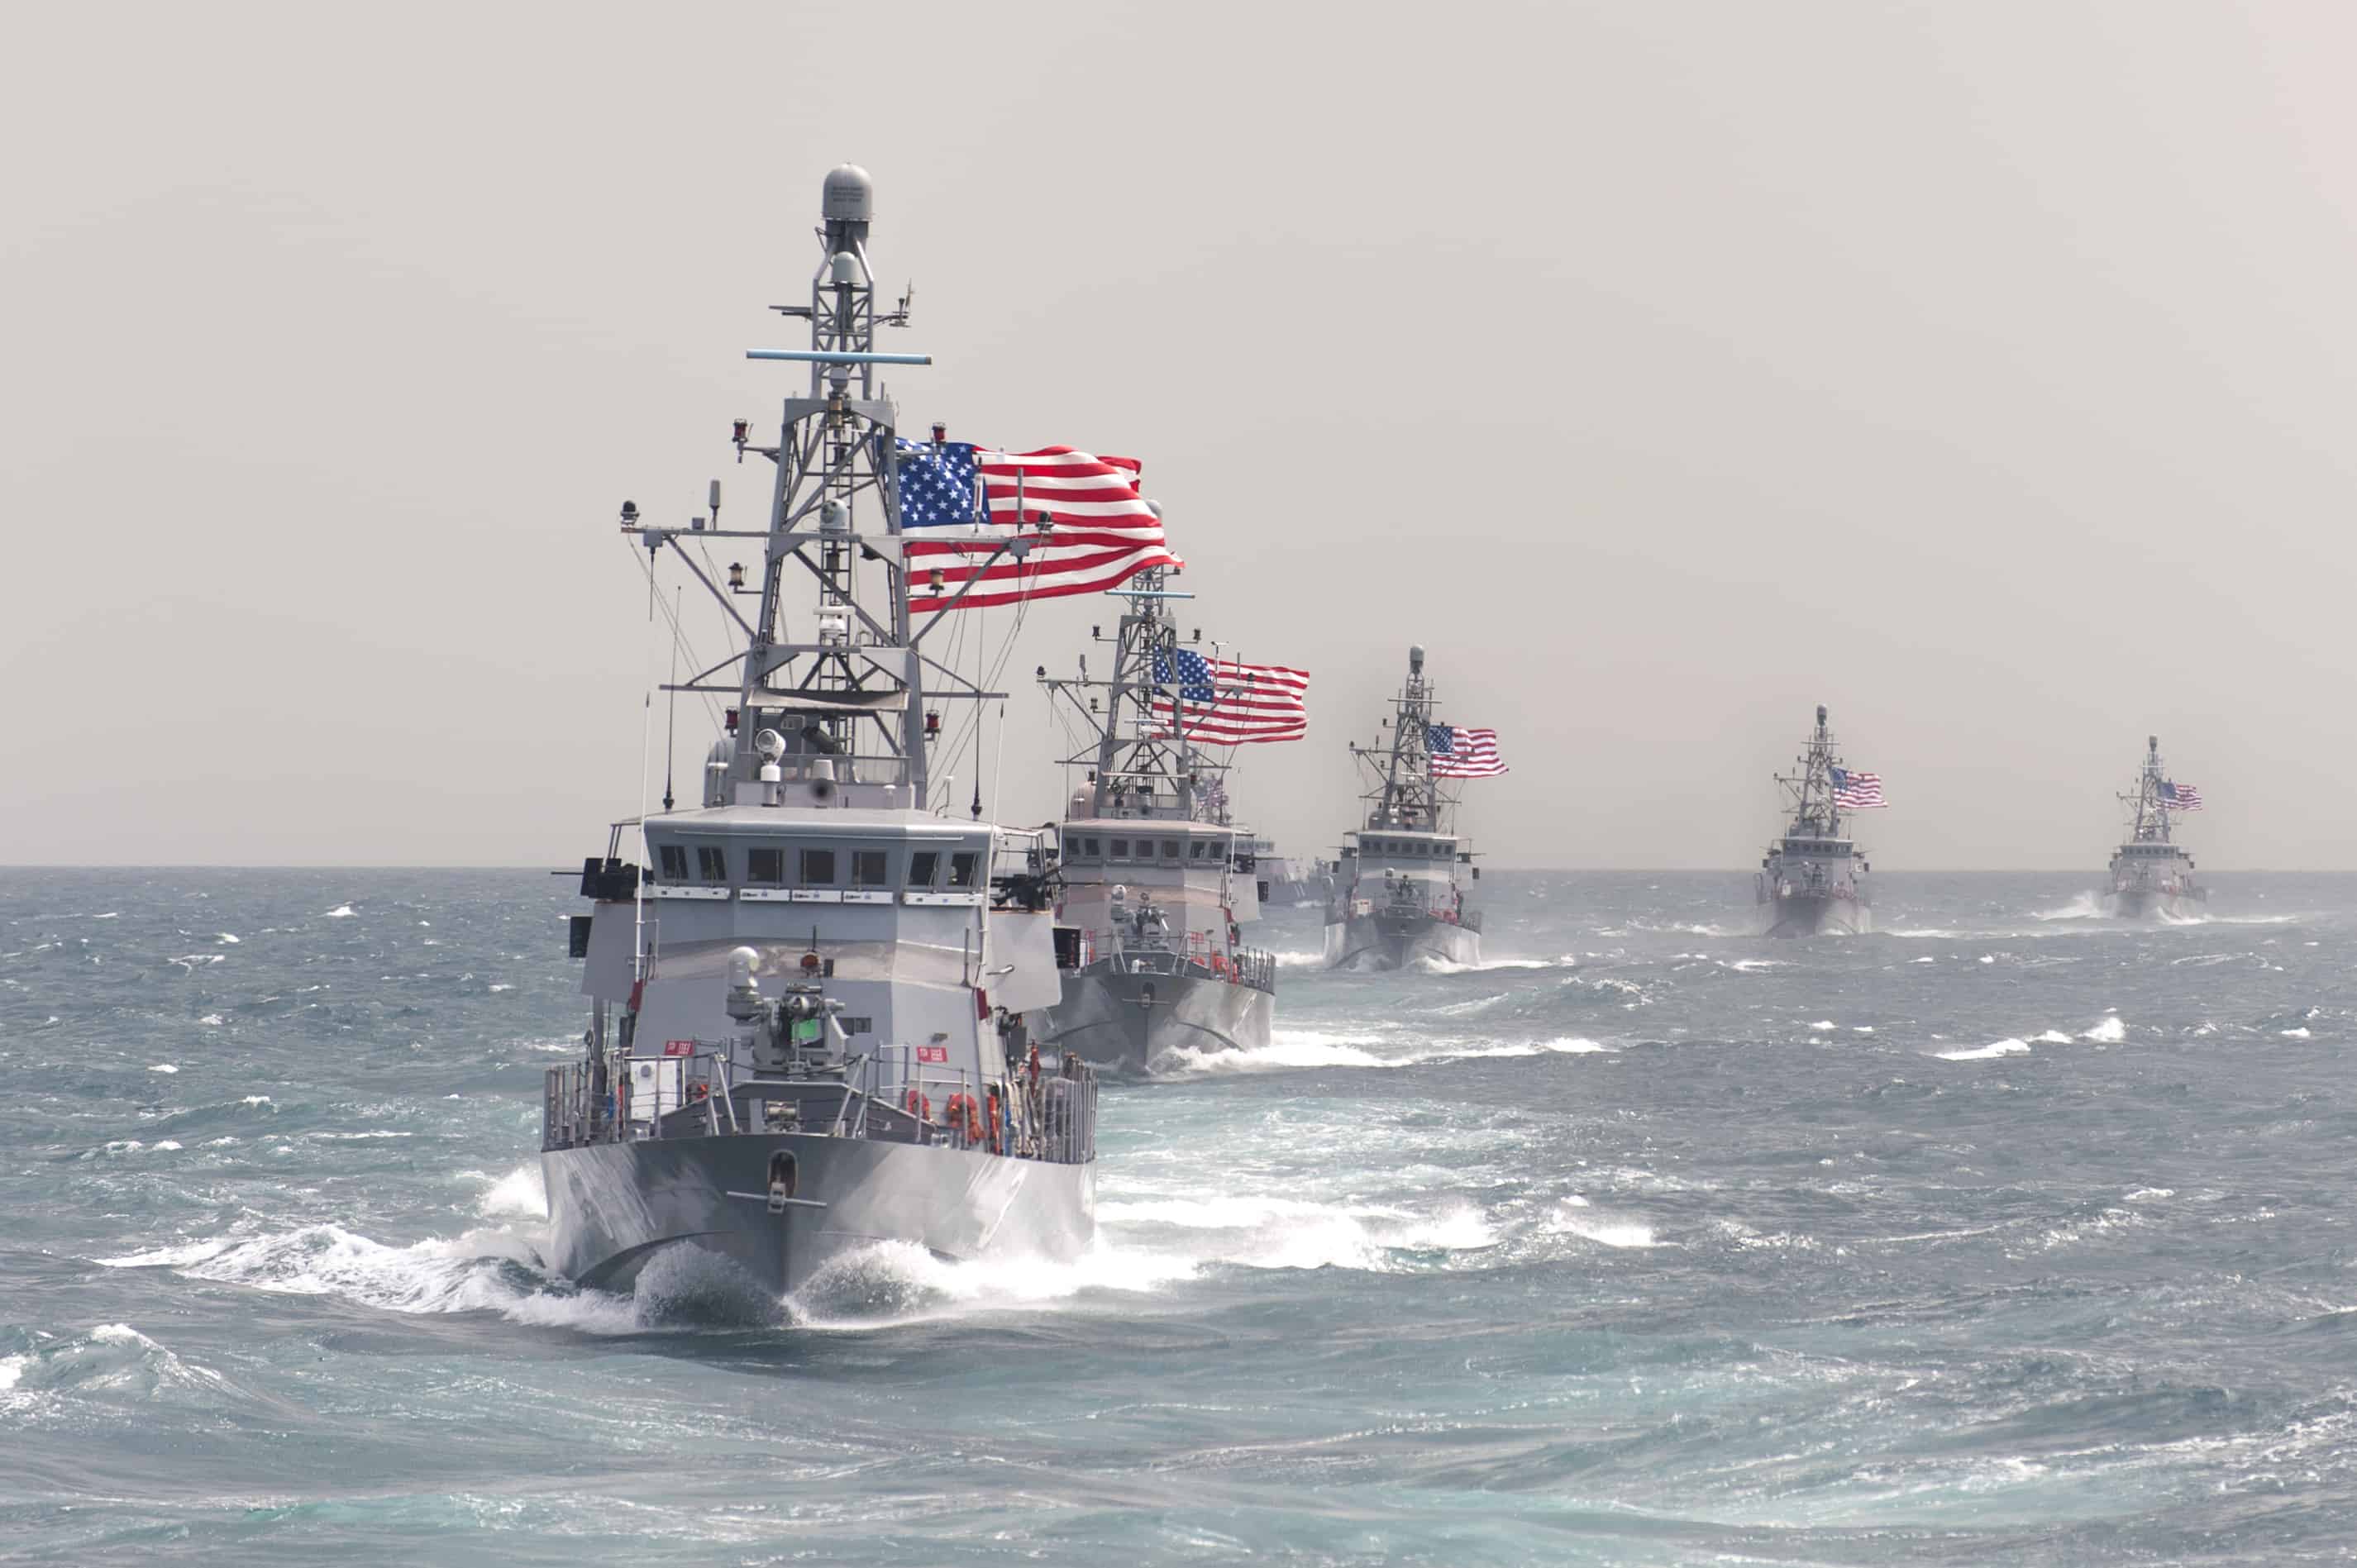 U.S. 5TH FLEET AREA OF RESPONSIBILITY (March 17, 2014) The Cyclone-class coastal patrol ship USS Hurricane (PC 3) leads other coastal patrol ships assigned to Patrol Coastal Squadron 1 (PCRON 1) in formation during a divisional tactics exercise. PCRON-1 is deployed supporting maritime security operations and theater security cooperation efforts in the U.S. 5th Fleet area of responsibility. (U.S. Navy photo by Mass Communication Specialist 2nd Class Charles Oki/Released)